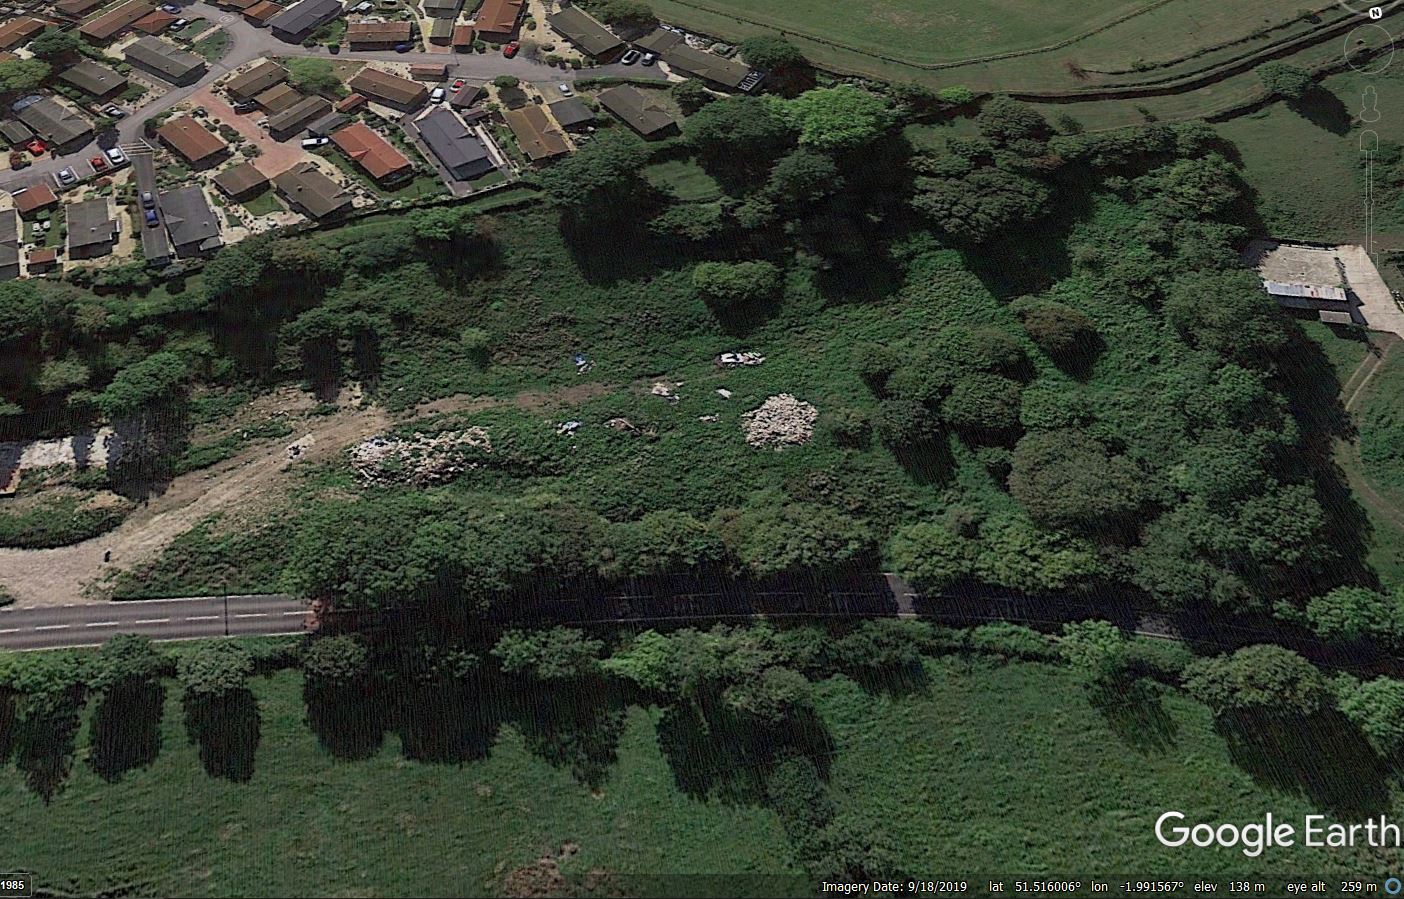 Google Earth image of the site of the Lyneham landslide in Wiltshire.